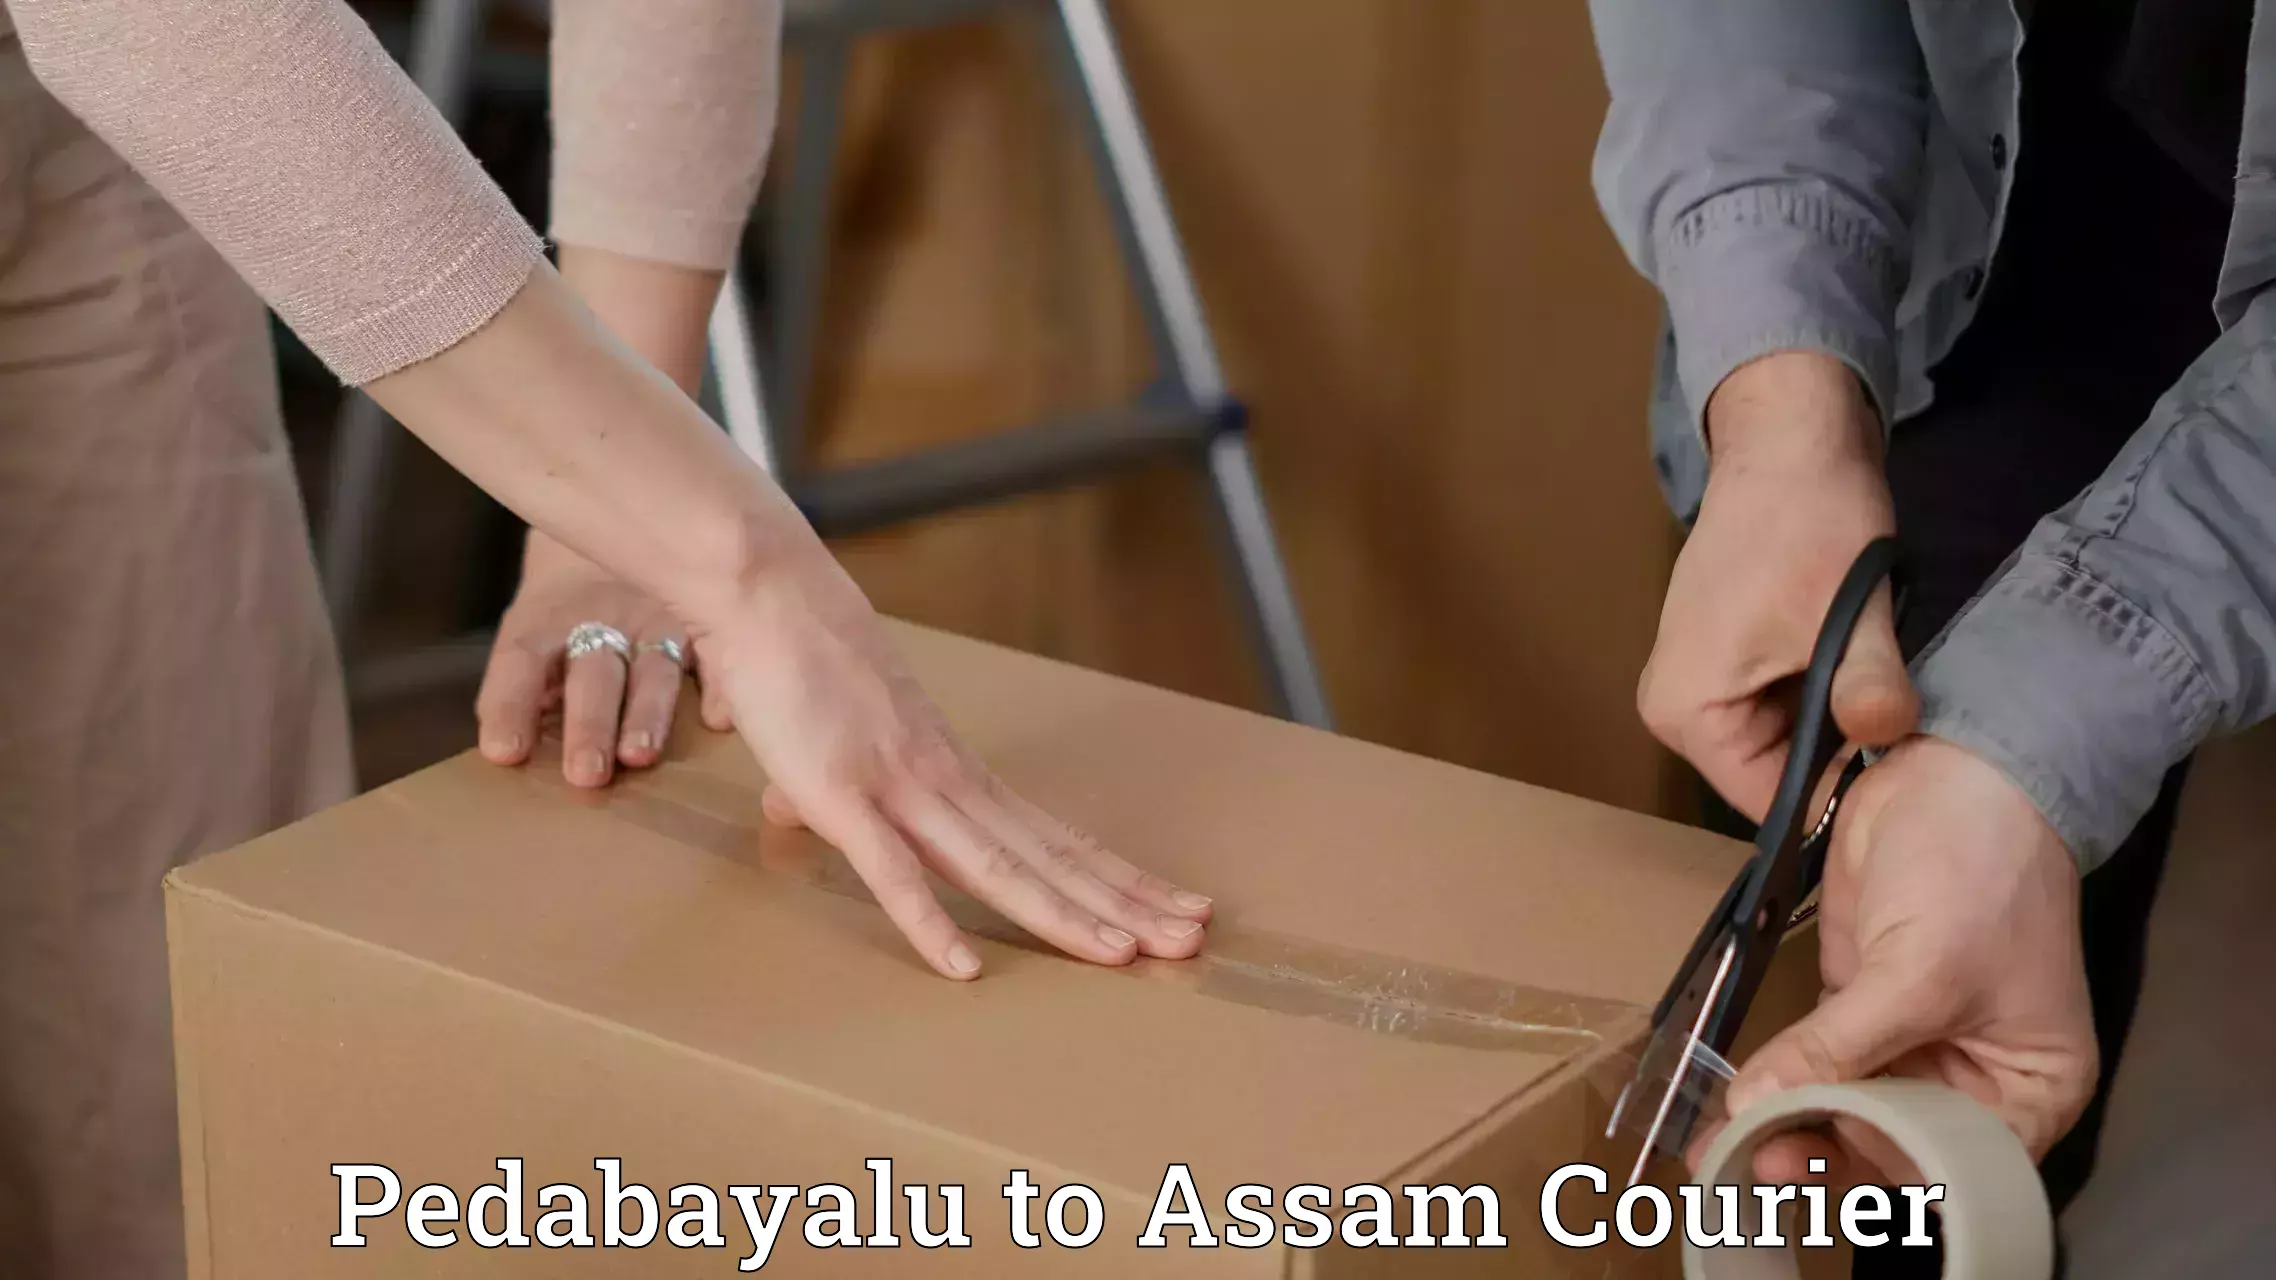 Courier services Pedabayalu to Lala Assam